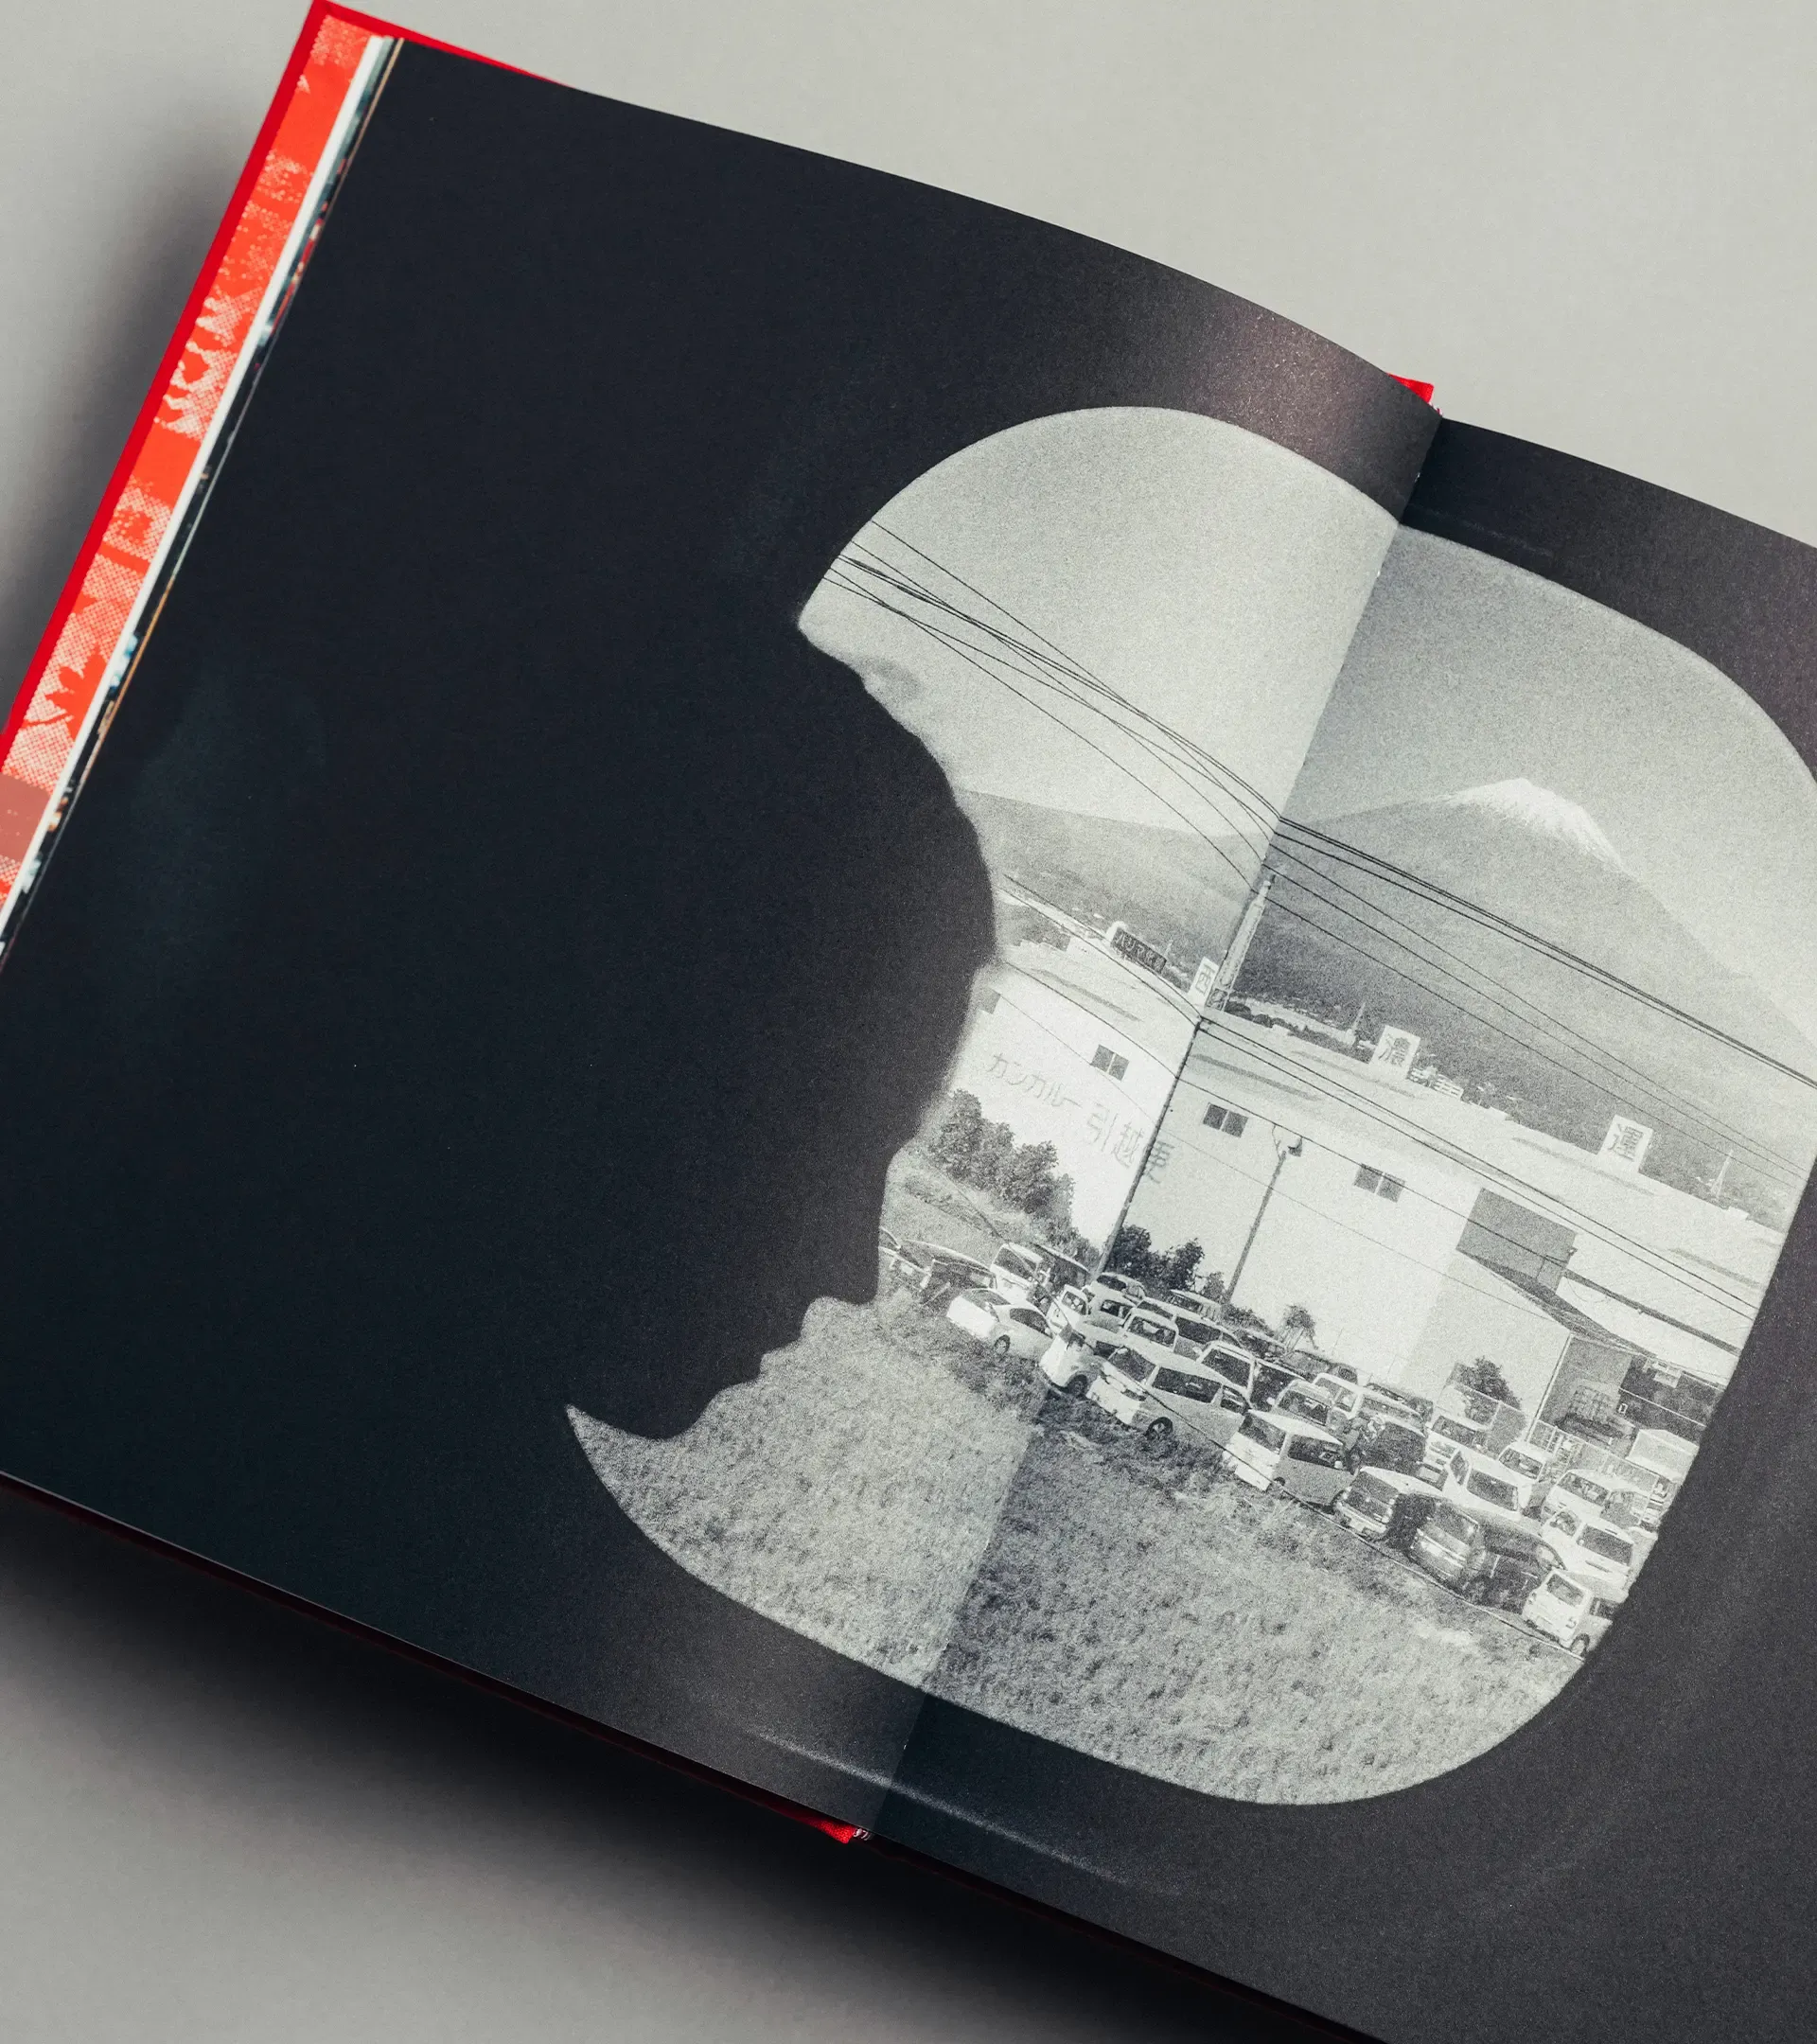 Book 'Type 7 Travel Guide to Tokyo'